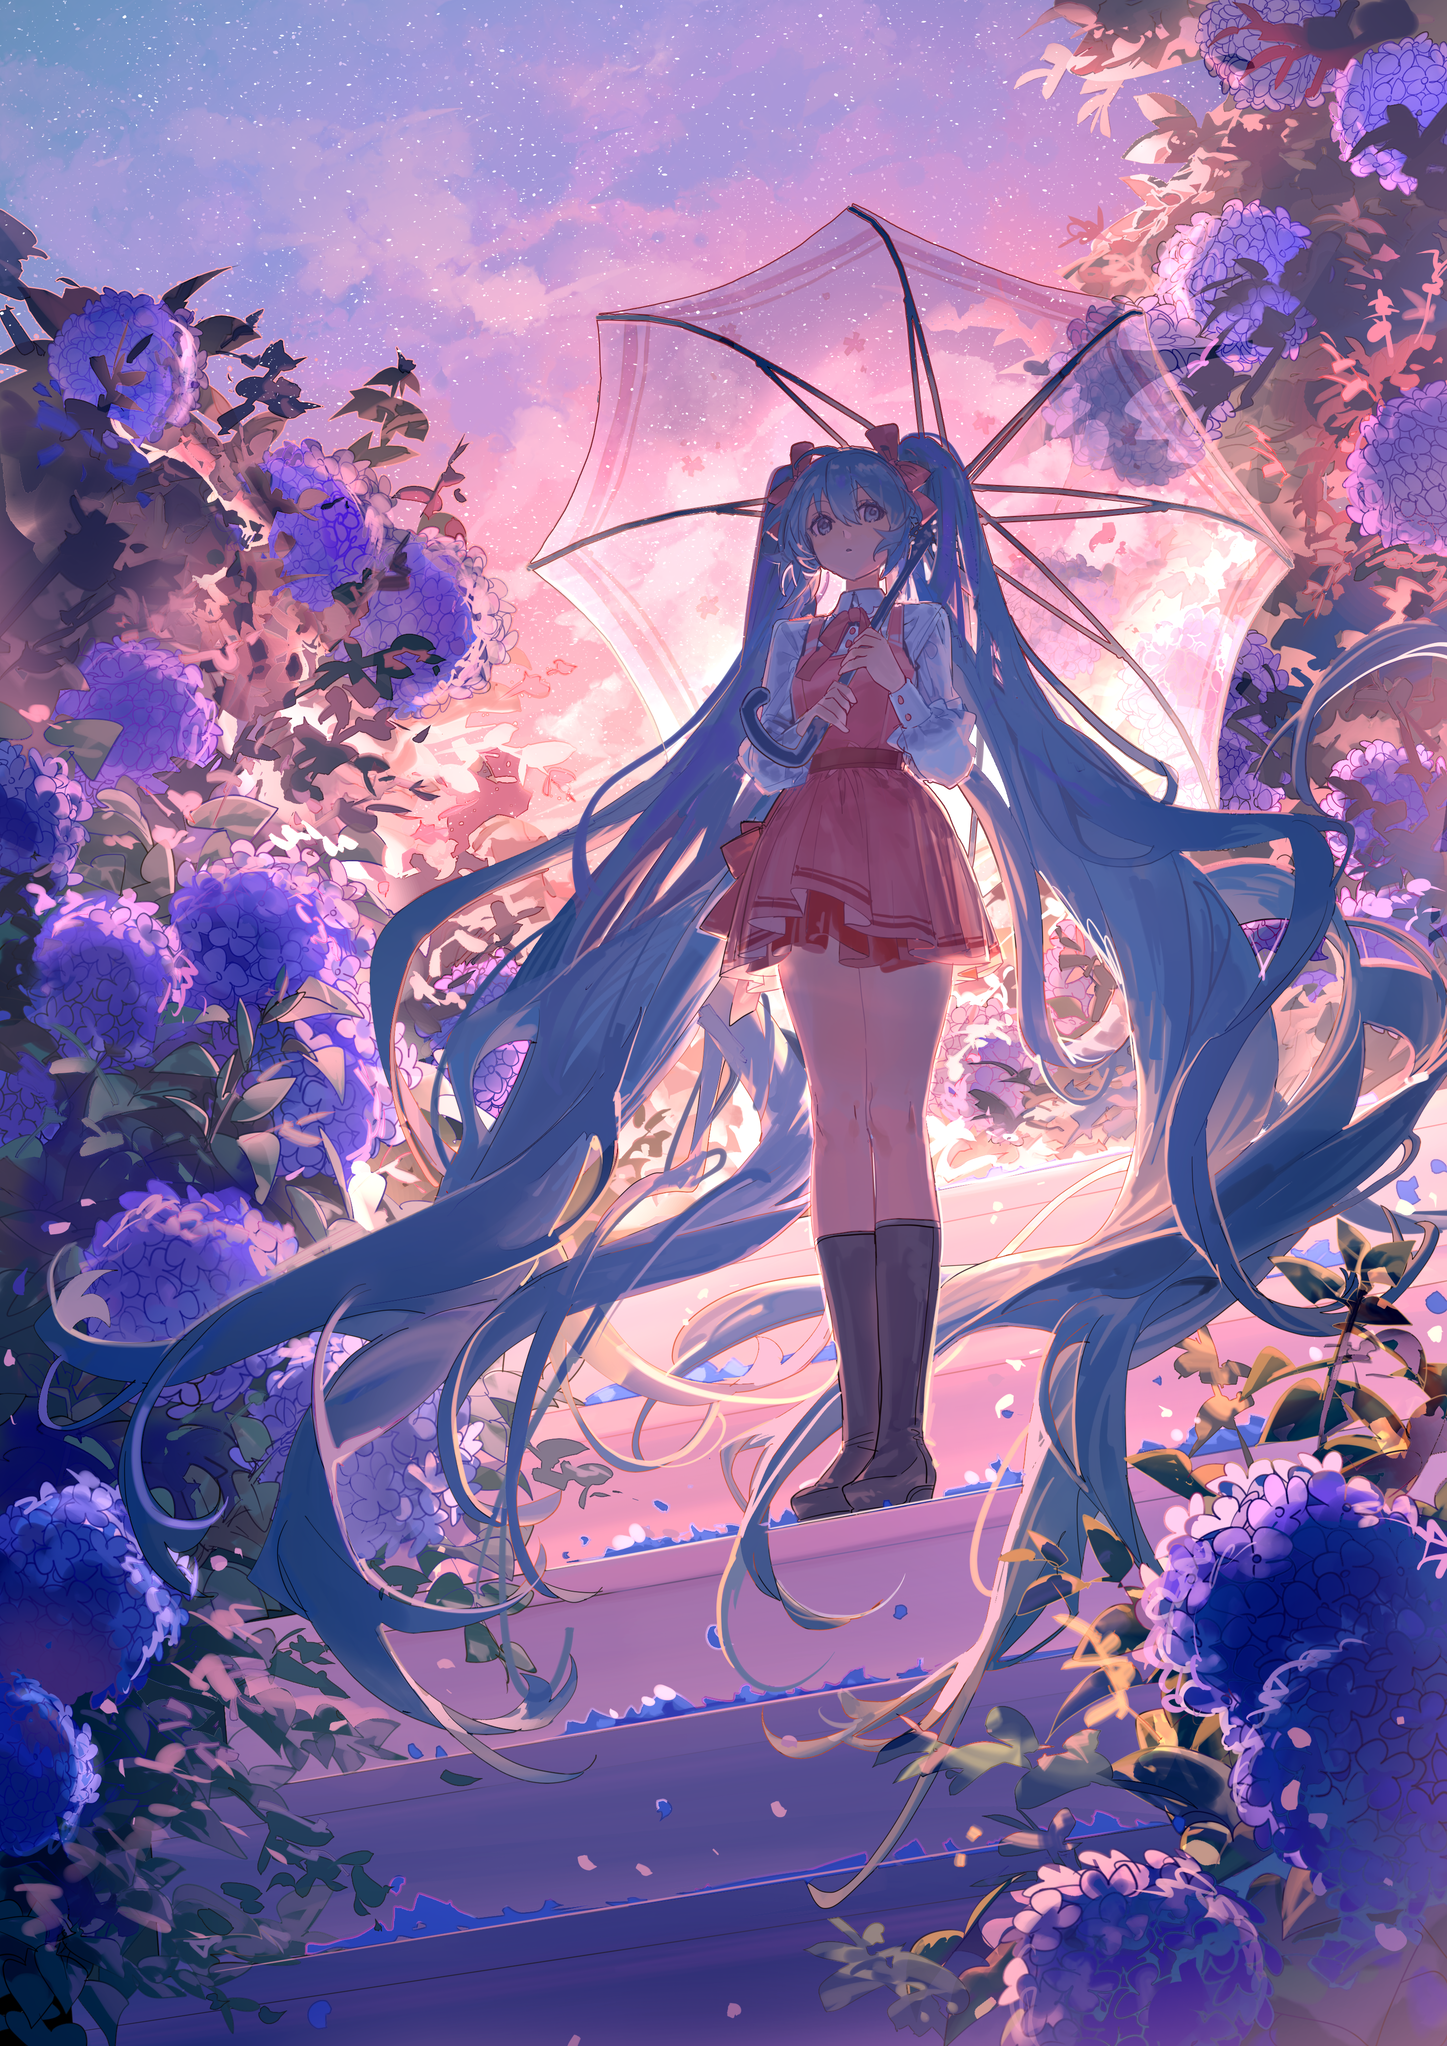 Anime 1447x2046 anime Pixiv anime girls flowers Vocaloid Hatsune Miku umbrella twintails stairs portrait display sunset sunset glow standing leaves sky long hair looking away dress frills skirt blue hair blue eyes petals clouds Shuno (artist)